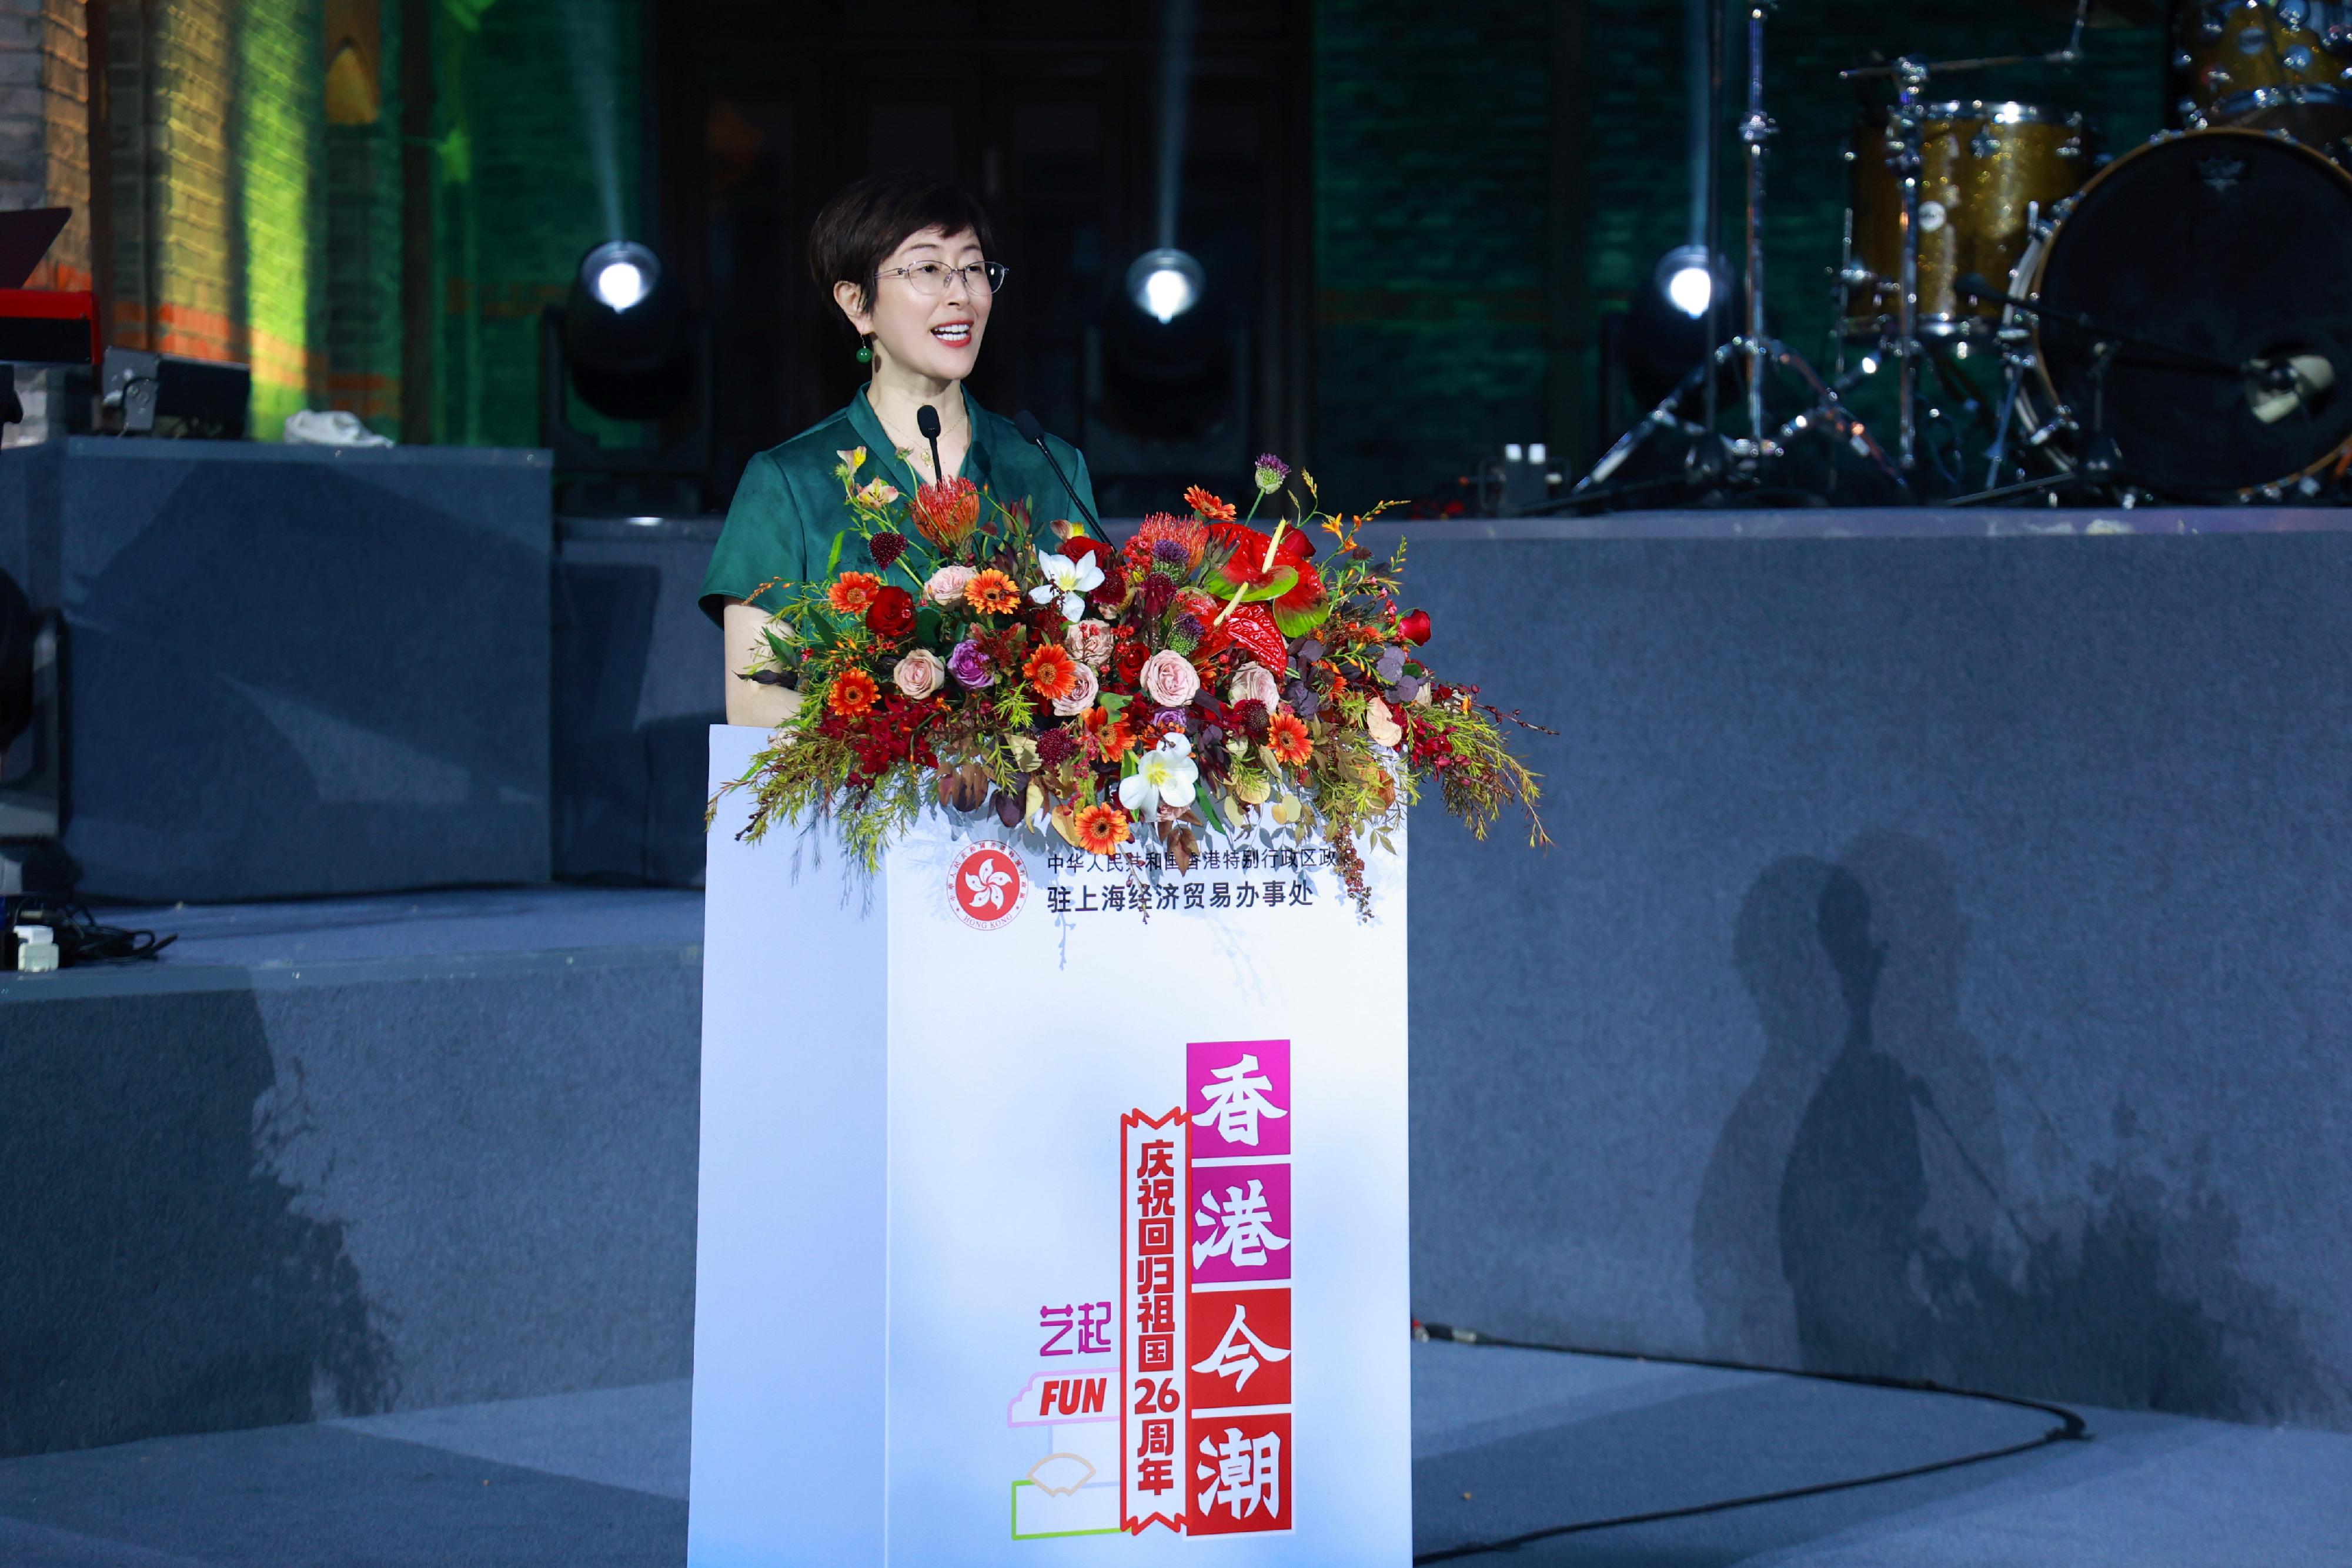 To celebrate the 26th anniversary of Hong Kong's return to the motherland, the Hong Kong Economic and Trade Office in Shanghai (SHETO) unveiled a series of celebratory events today (July 1) in Shanghai. Photo shows the Director of the SHETO, Mrs Laura Aron, delivering a speech at the opening ceremony.